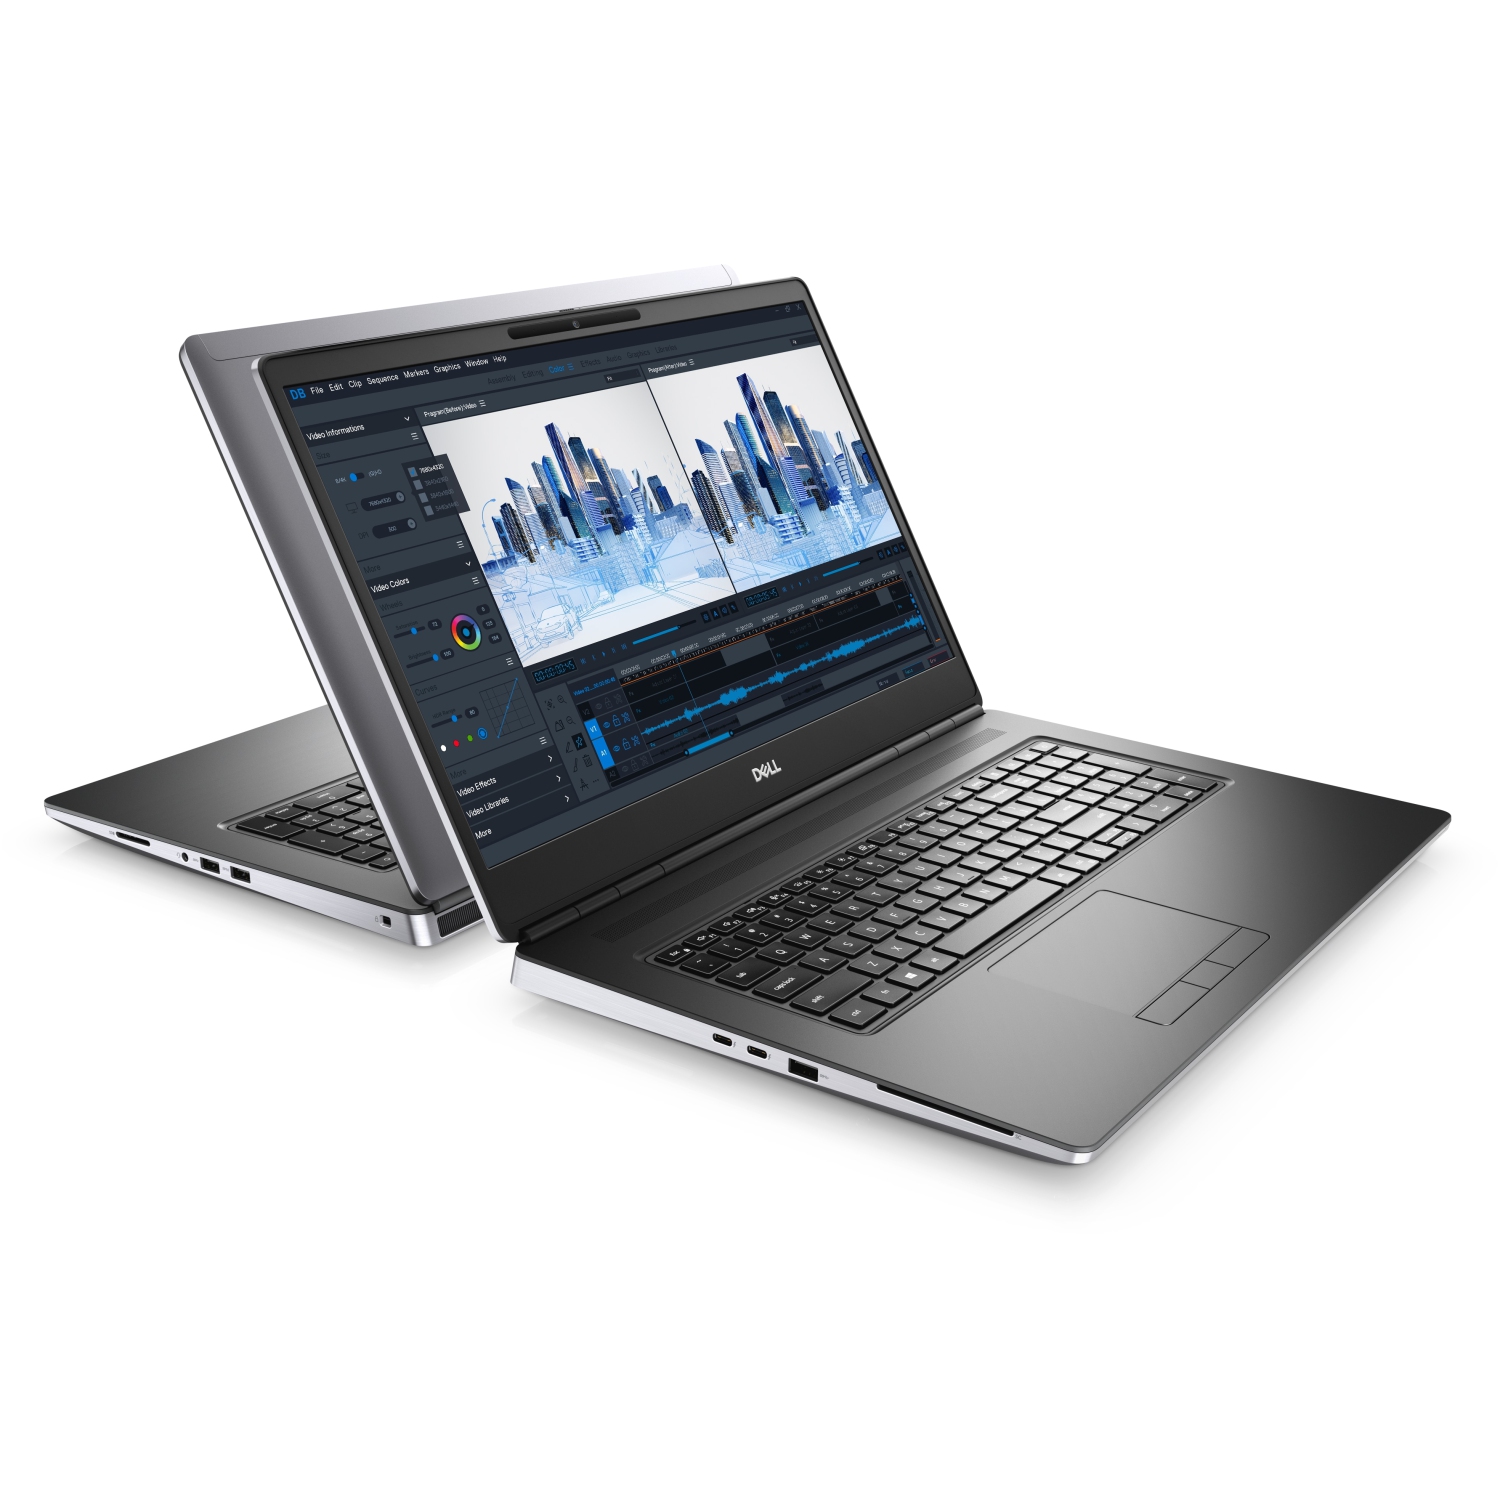 Refurbished (Excellent) - Dell Precision 7000 7760 Workstation Laptop (2021), 17.3" FHD, Core i9, 256GB SSD, 8GB RAM, RTX A4000, 5 GHz, 11th Gen CPU Certified Refurbished